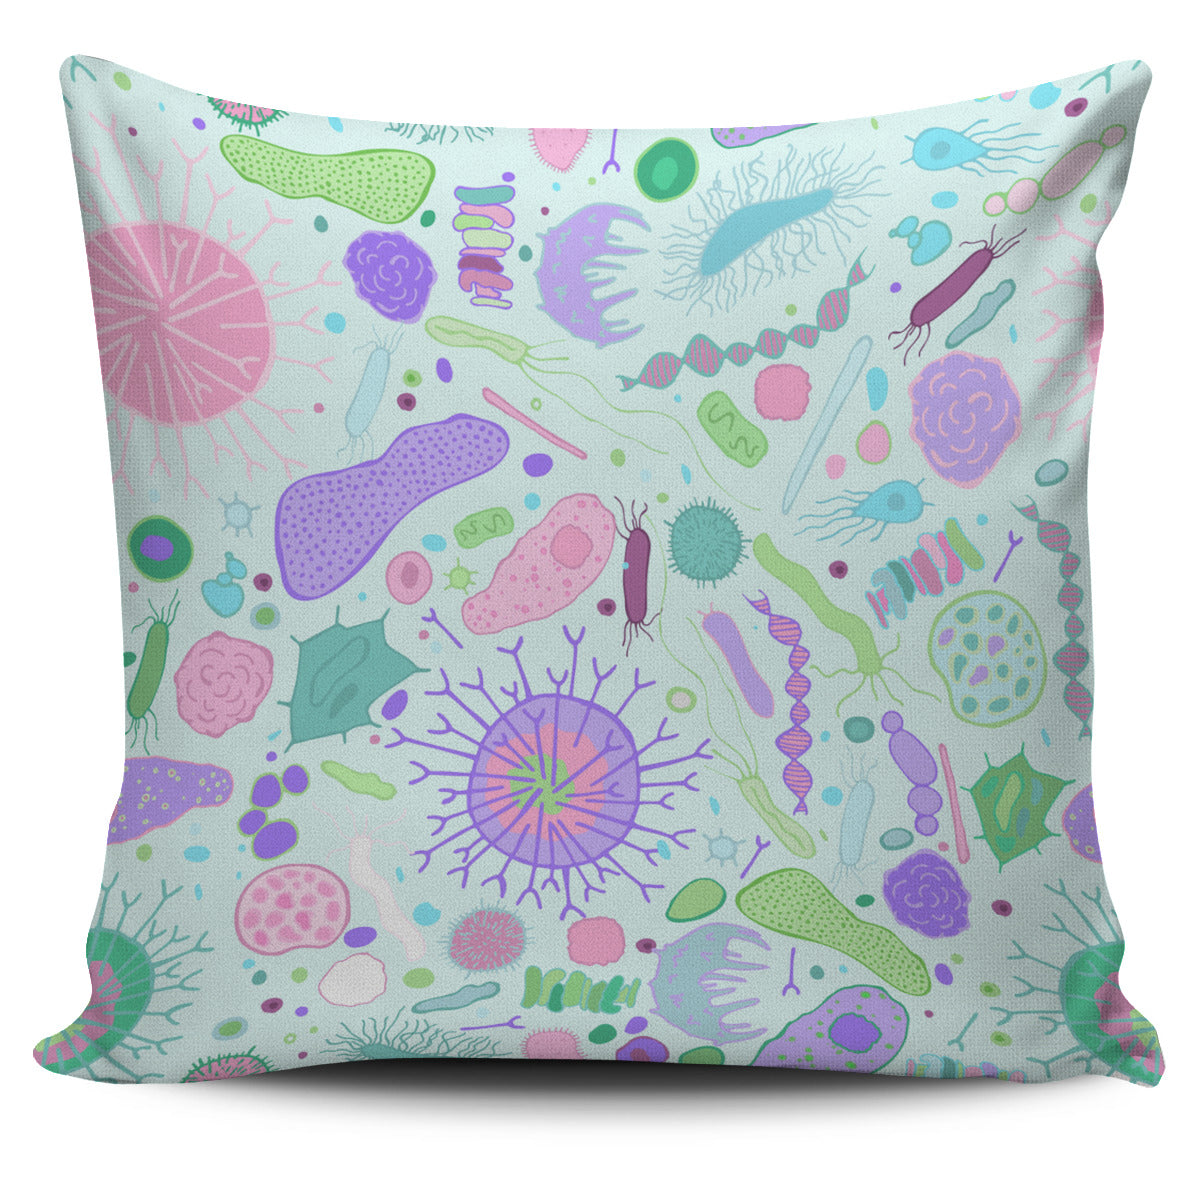 Neon Science Pillow Cover